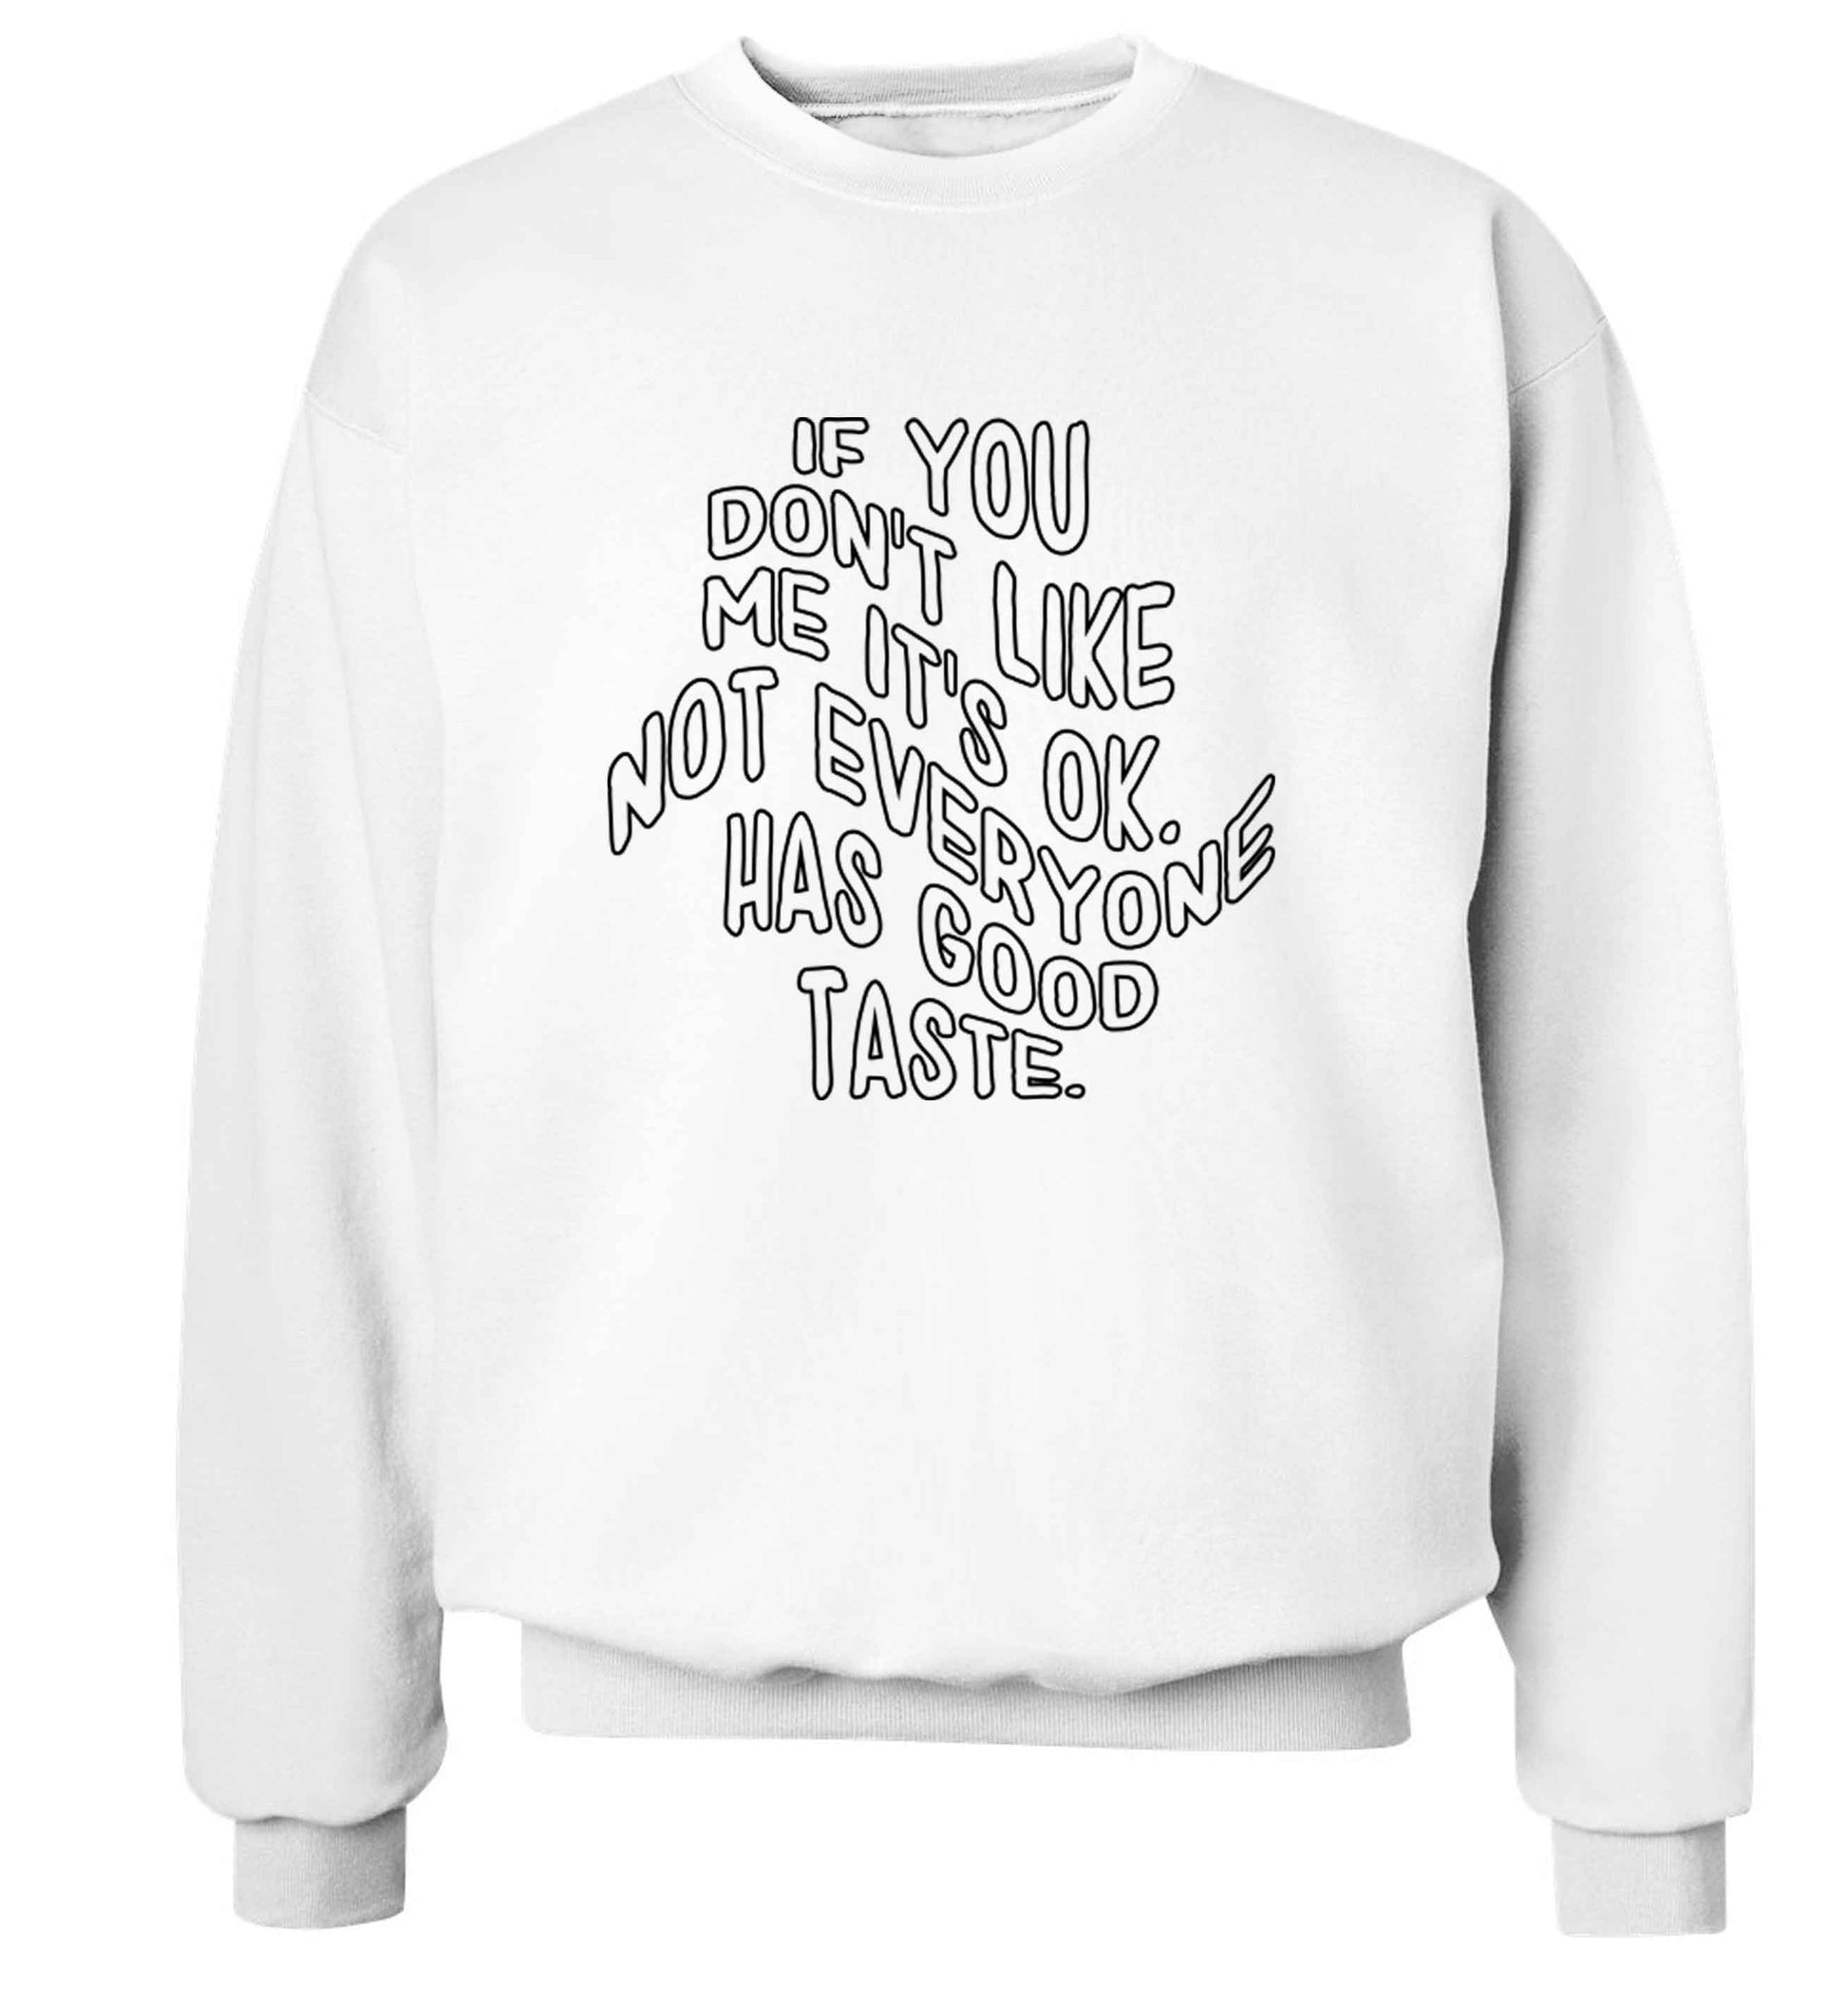 If you don't like me it's ok not everyone has good taste adult's unisex white sweater 2XL